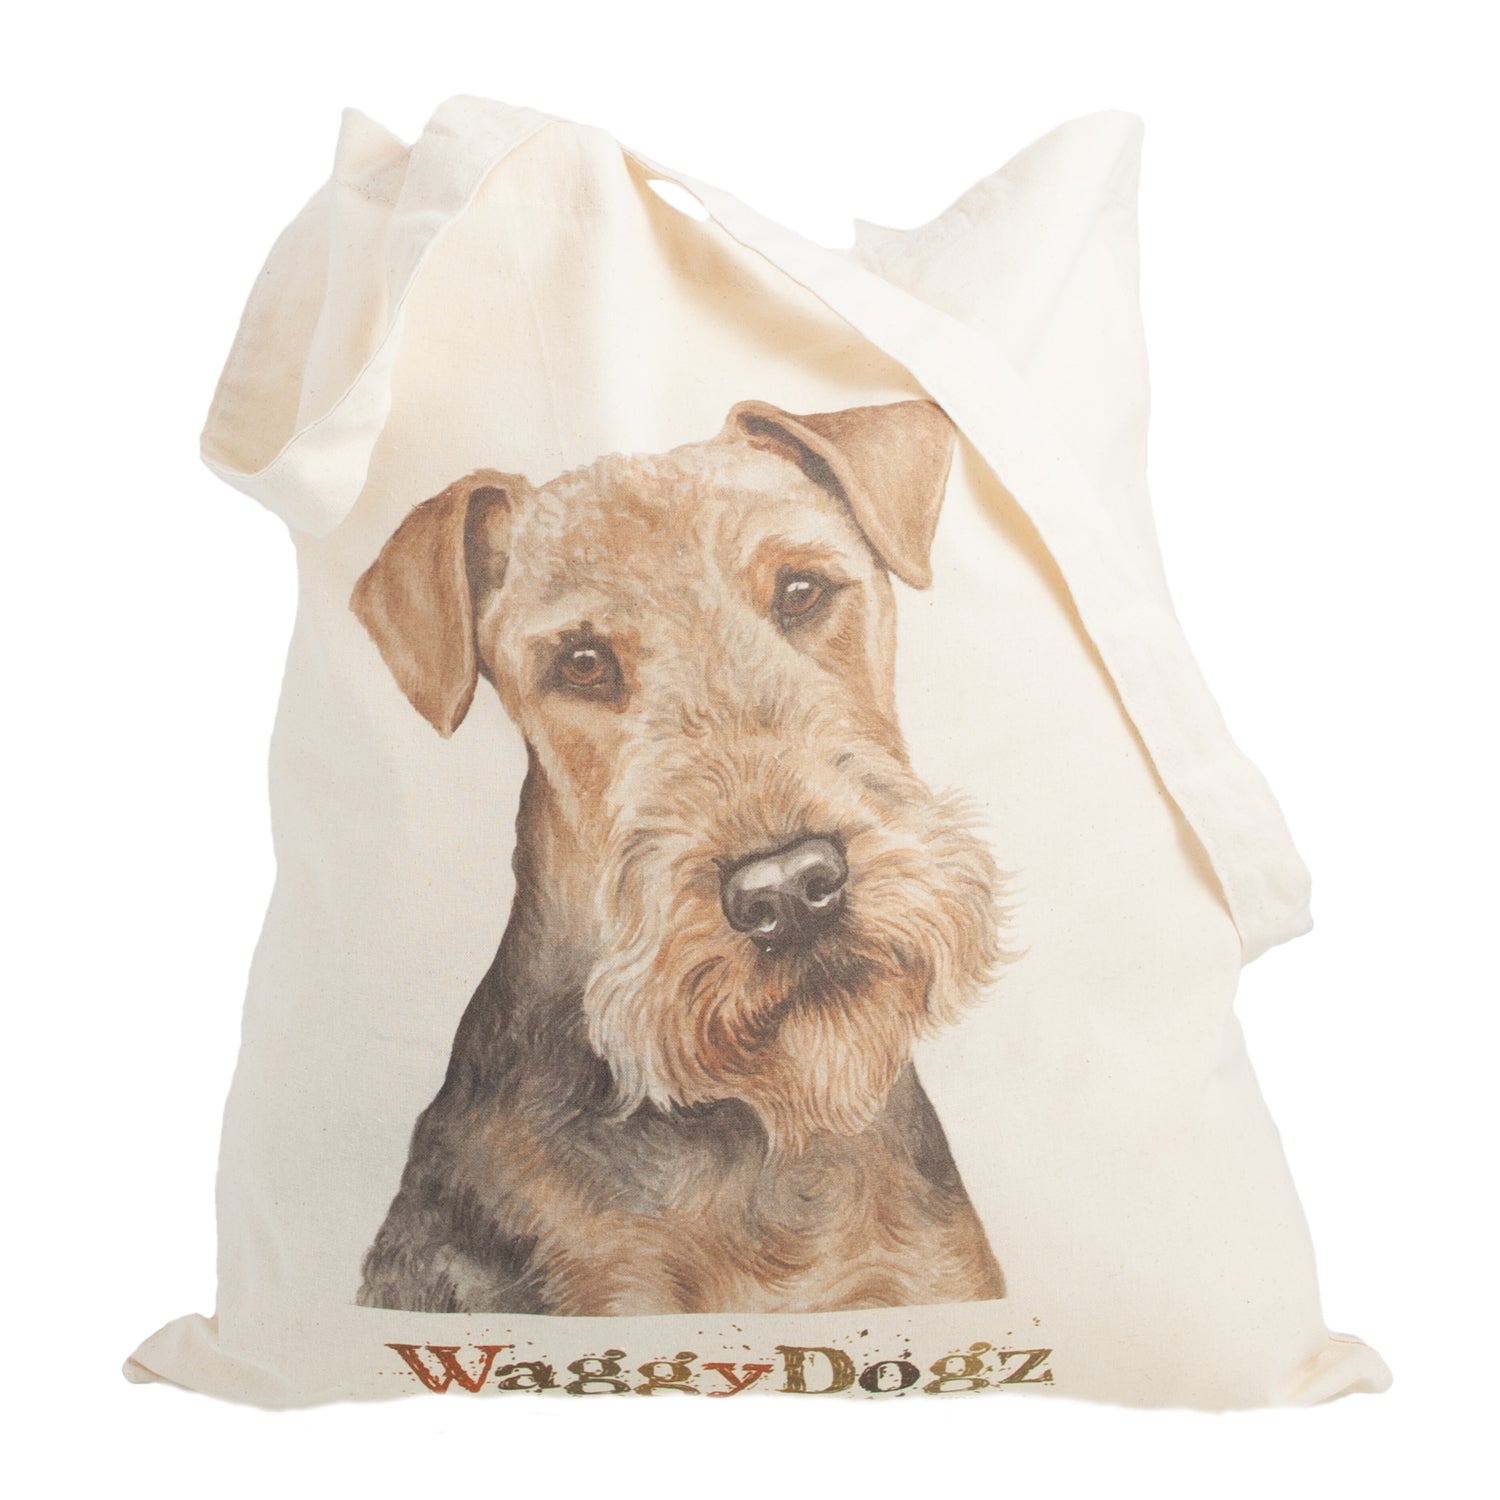 Dog Lover Gifts available at Dog Krazy Gifts. Airedale Tote Bag, part of our Christine Varley collection – available at www.dogkrazygifts.co.uk